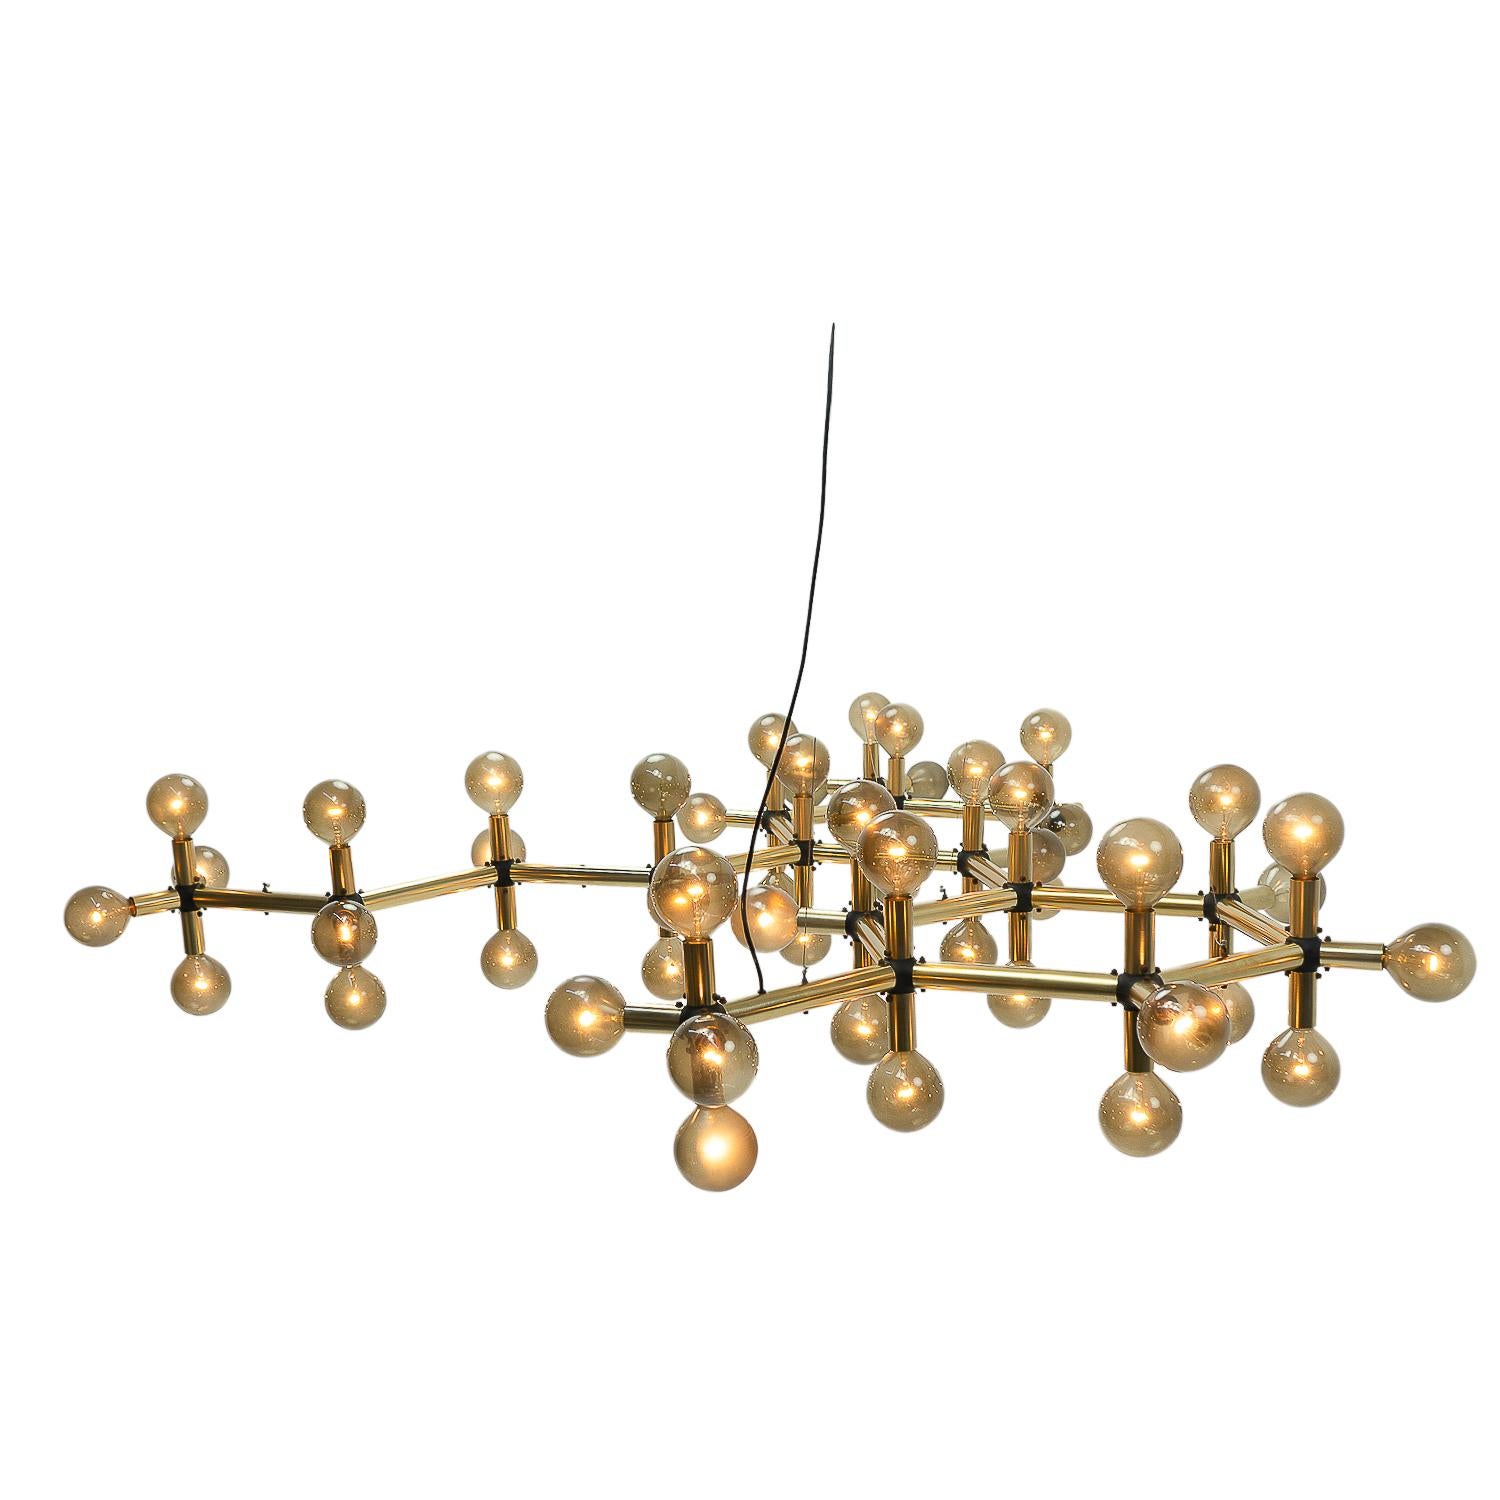 Swiss Design Classic Atomic Chandelier by Haussmann for Swisslamps Int, 1960s For Sale 3